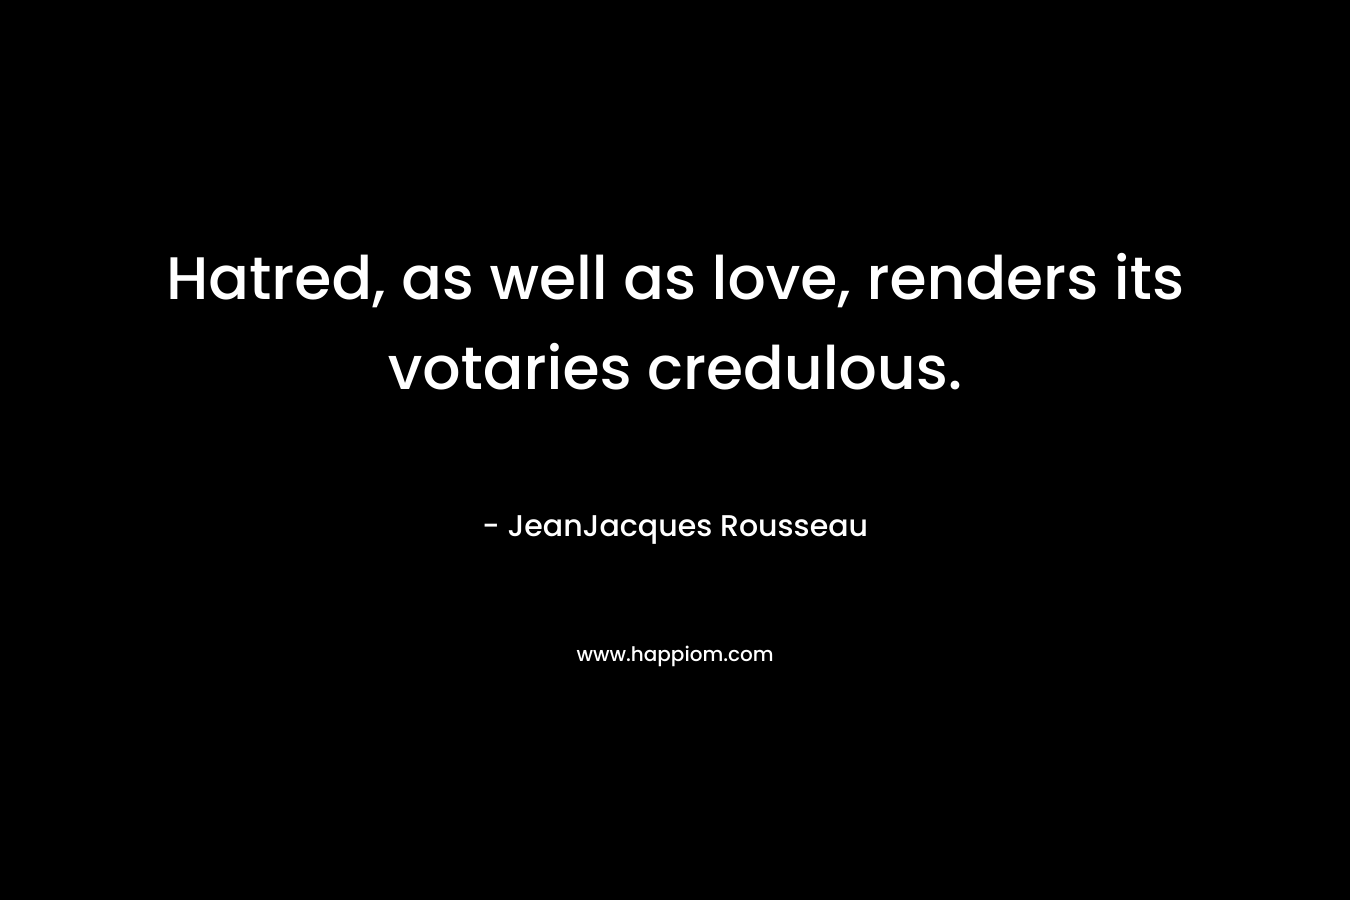 Hatred, as well as love, renders its votaries credulous. – JeanJacques Rousseau